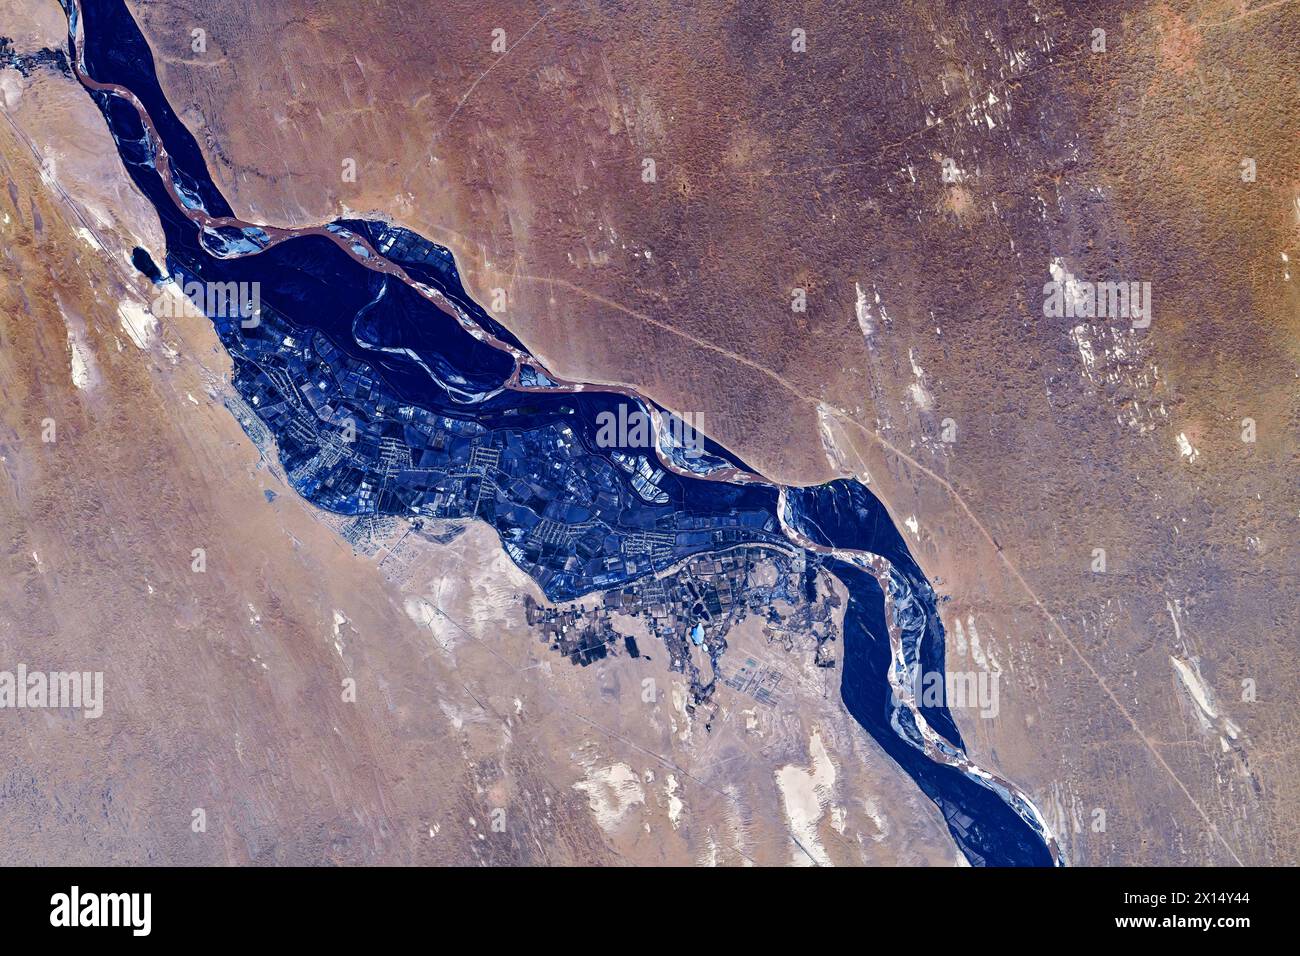 River on the border of Uzbekistan and Turkmenistan. Digital enhancement of an image by NASA Stock Photo